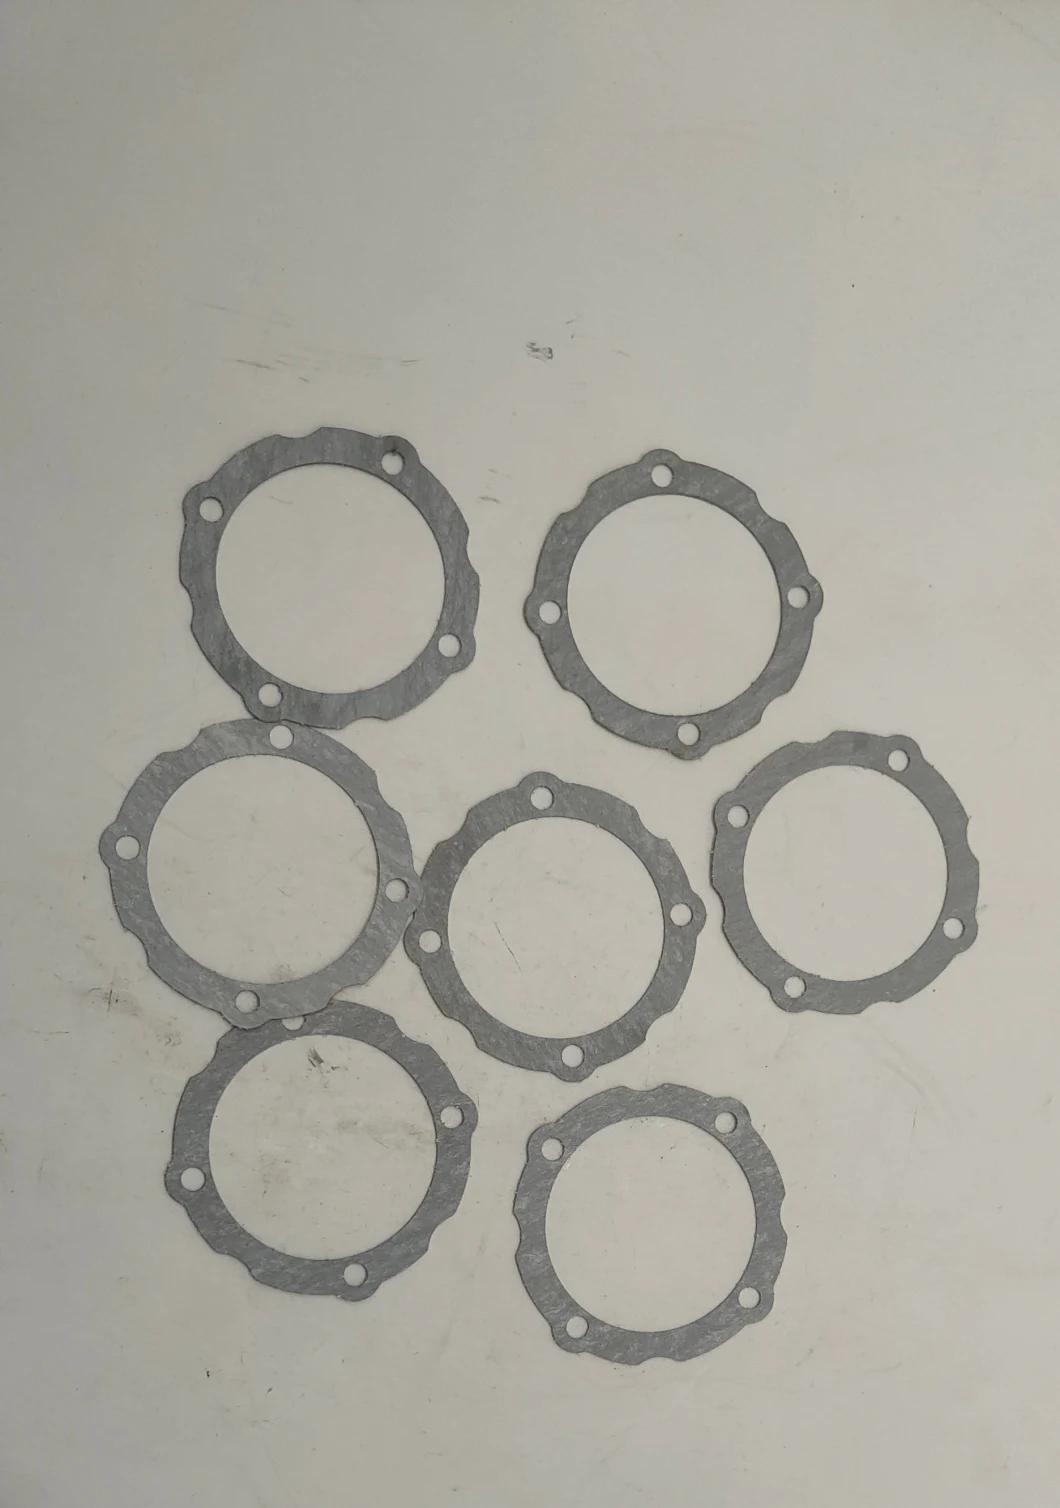 Motorcycle Spare Parts Clutch Cover Gasket Kit of CD 70